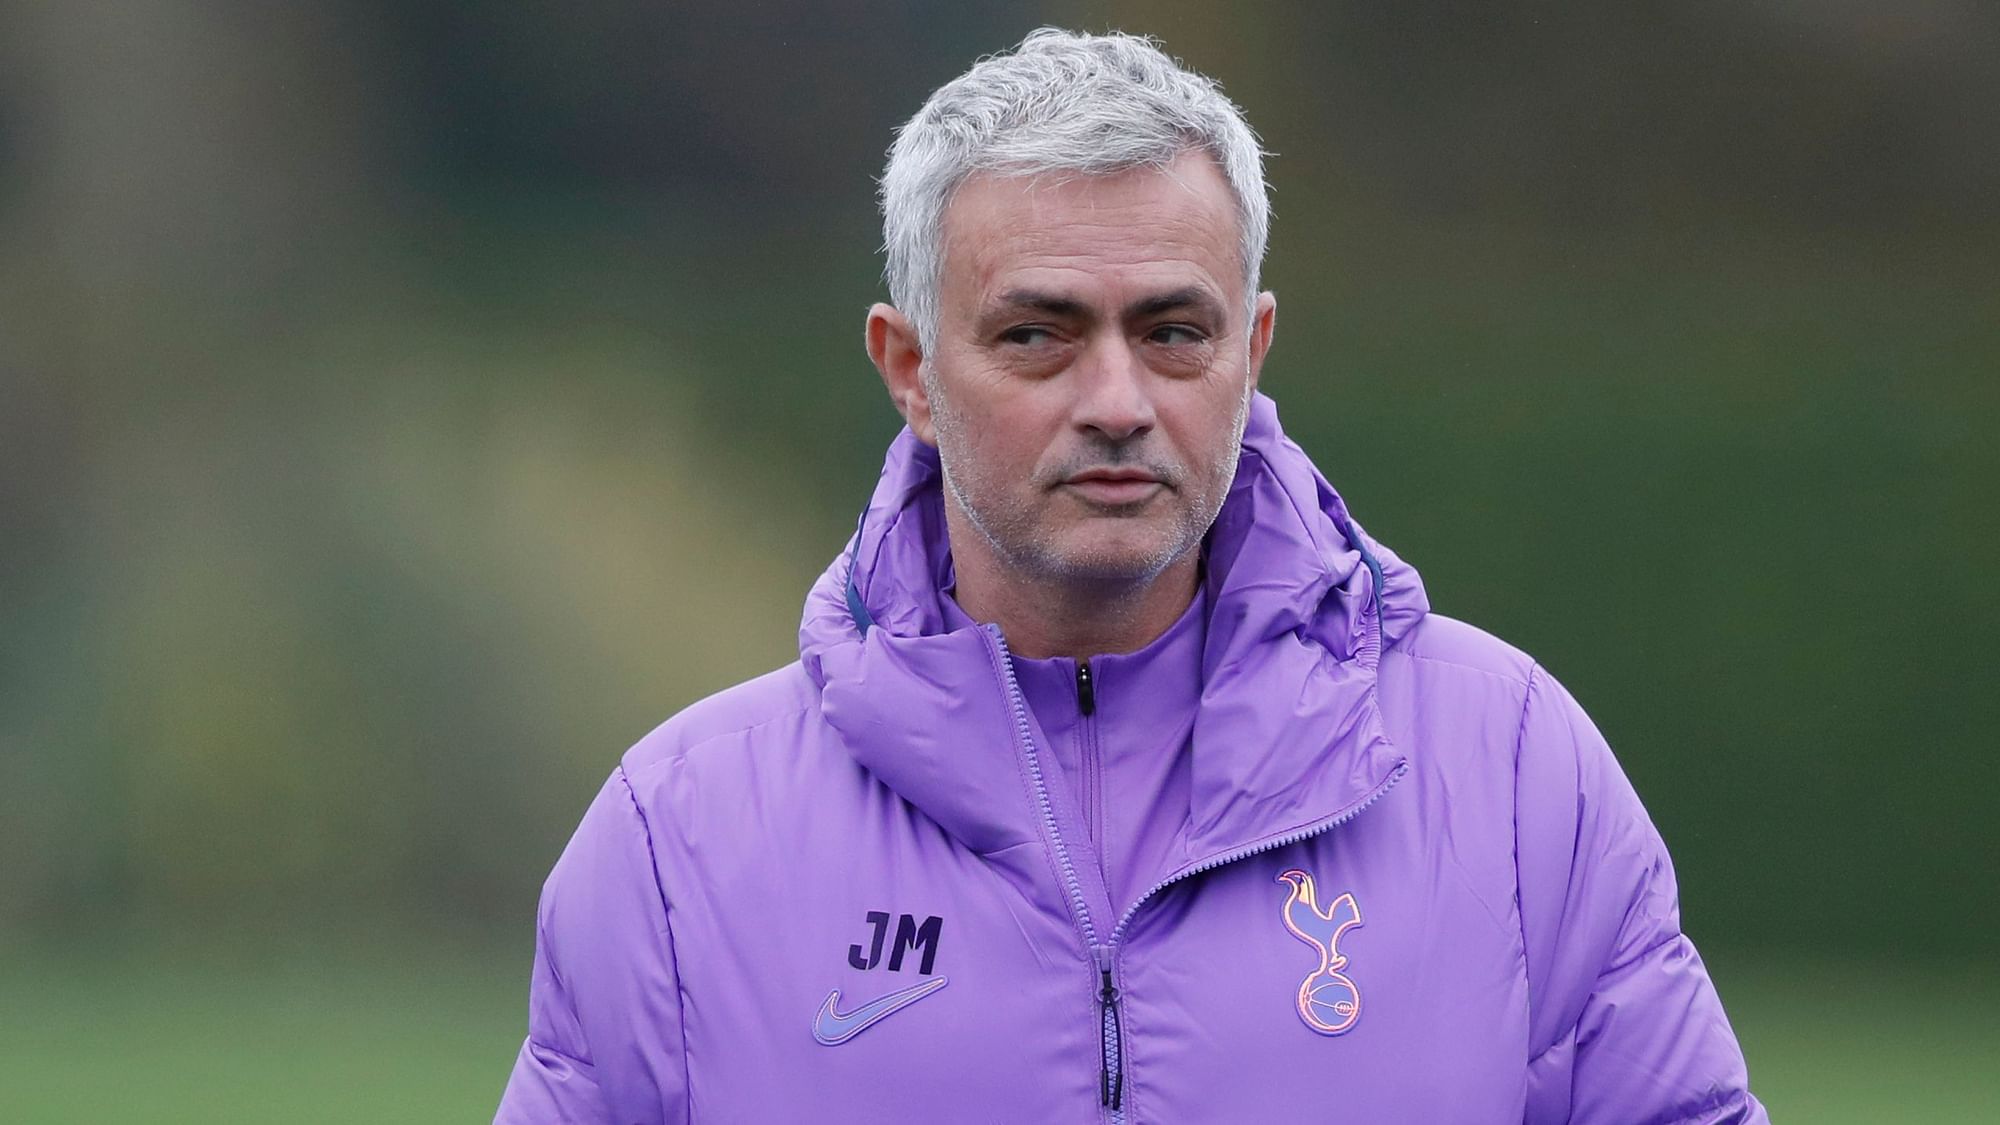 Tottenham Hotspur’s manager Jose Mourinho watches his players during a training session at their training ground in London, Monday Nov. 25, 2019, ahead of their Champions League Group B match against Olympiakos.